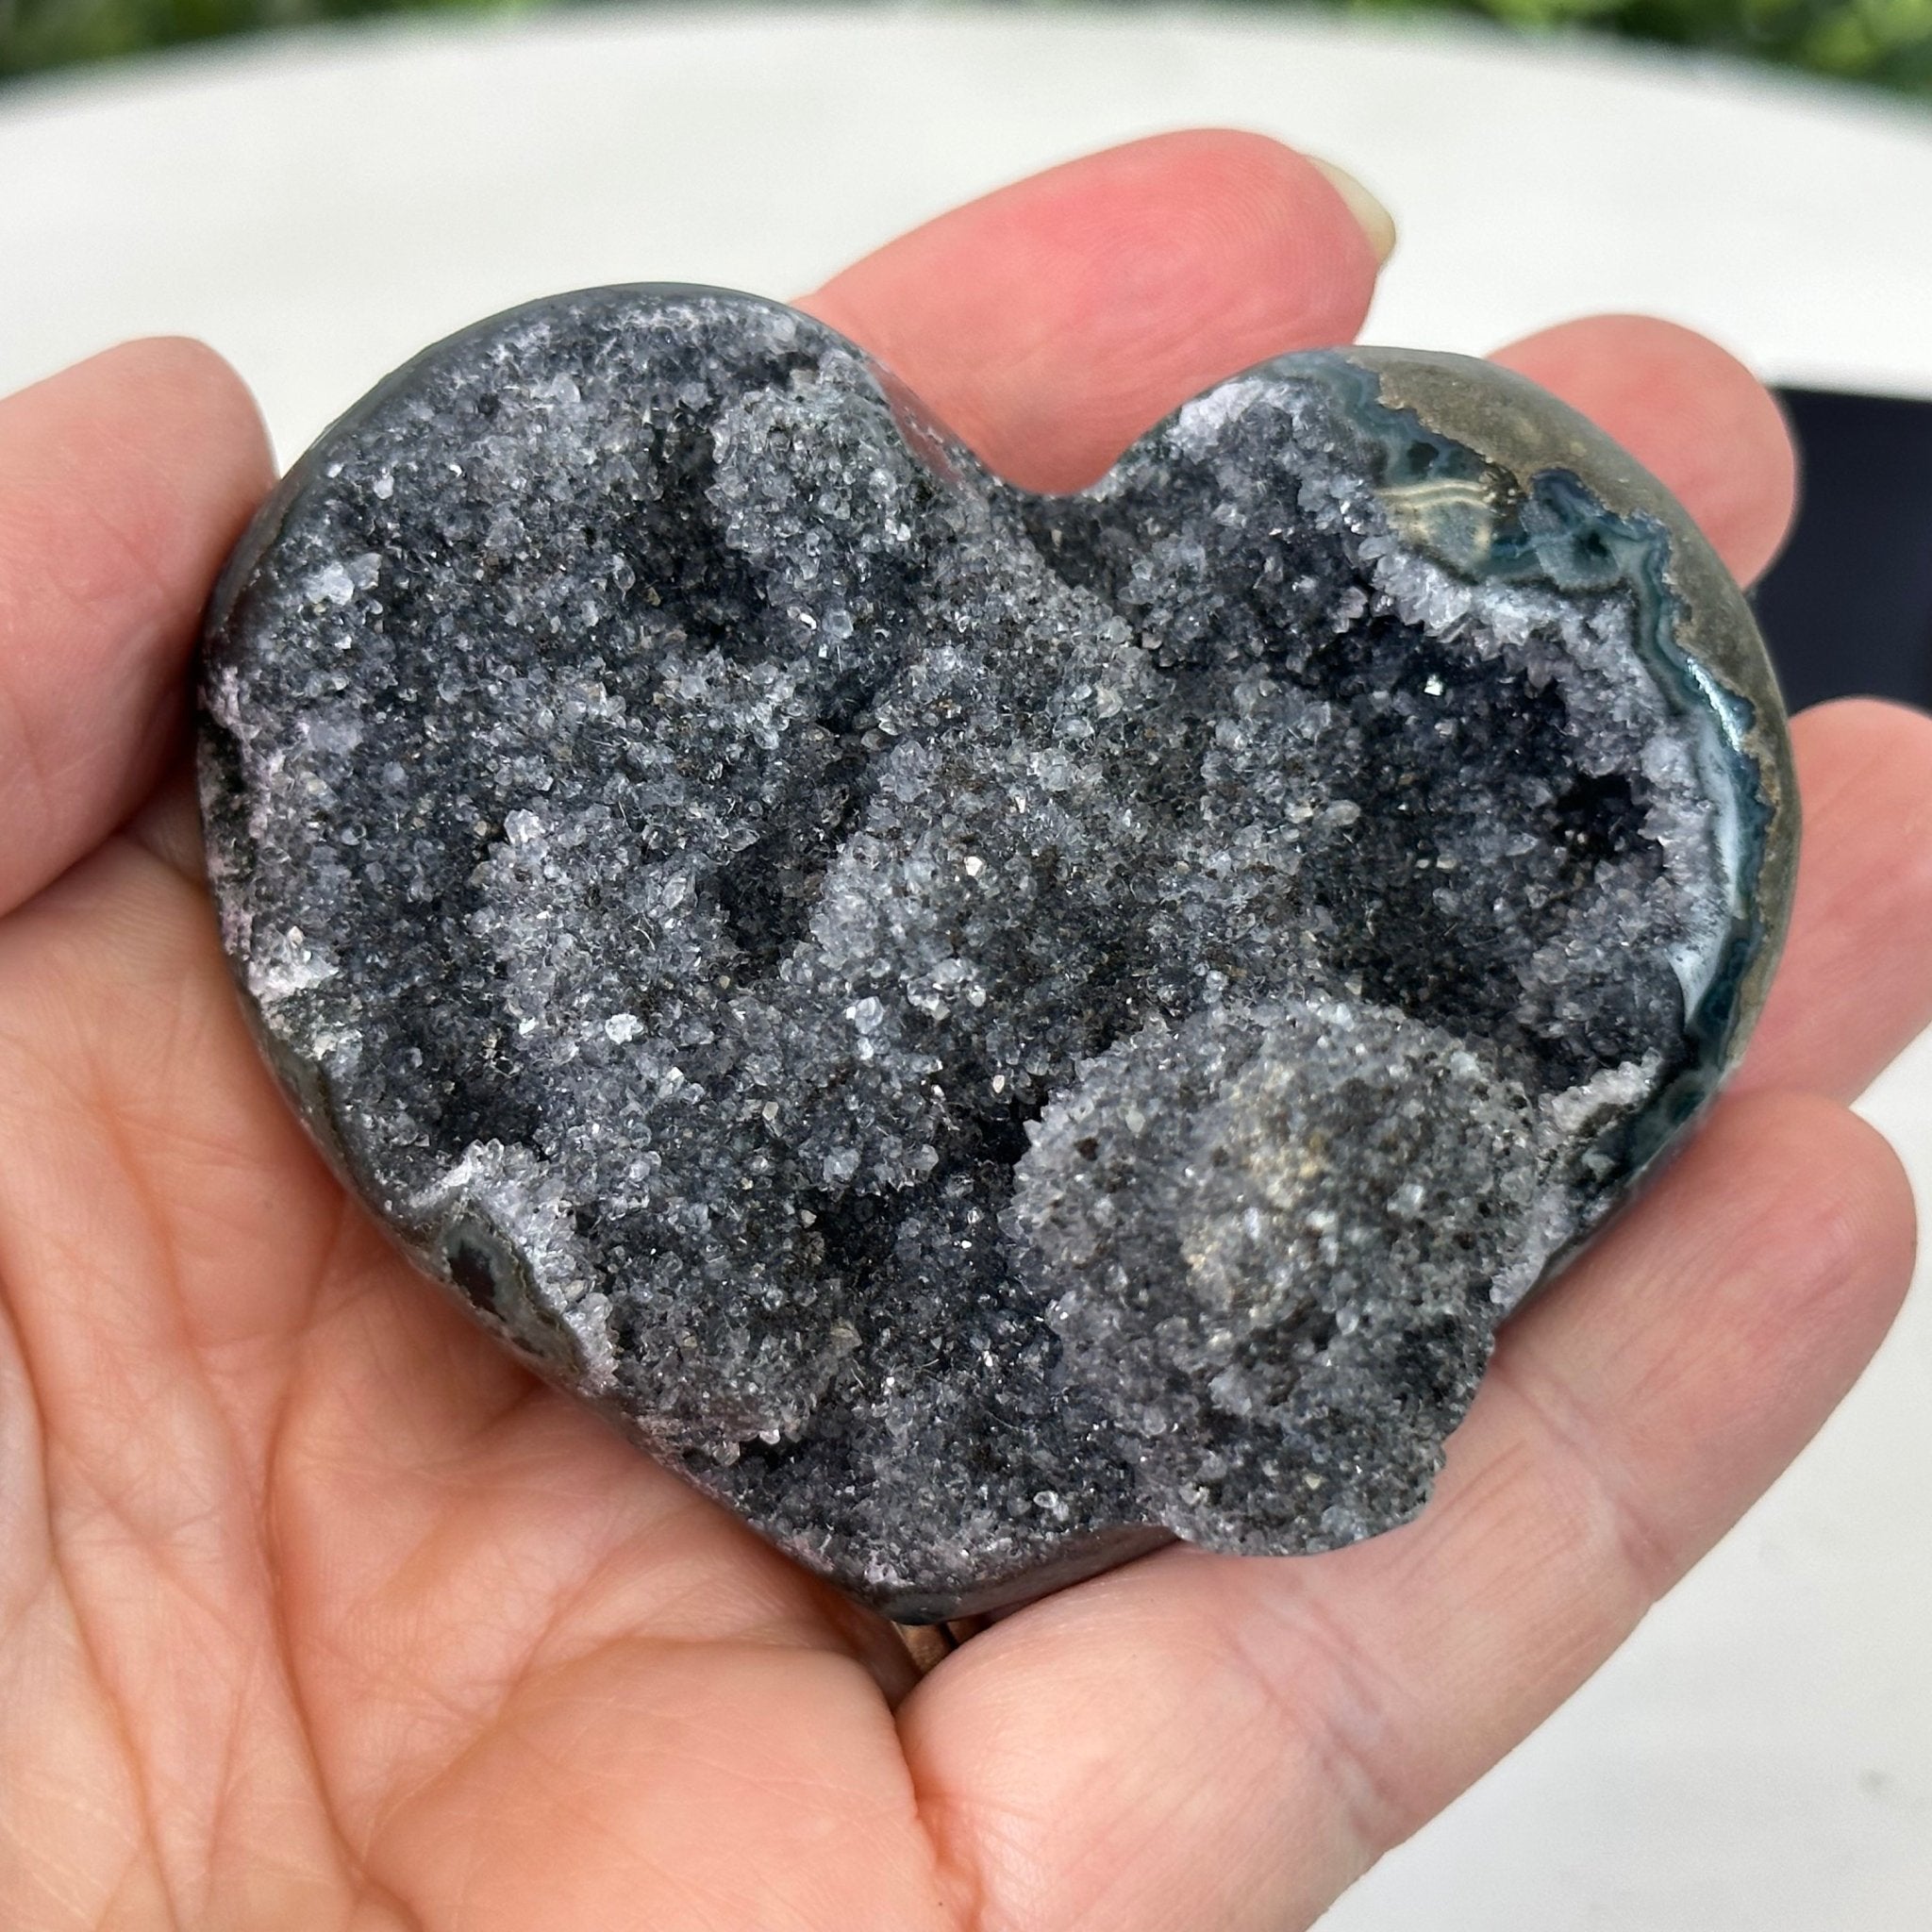 Extra Plus Quality Amethyst Heart Geode on an Acrylic Stand, 0.29 lbs & 2.1" Tall #5462-0024 by Brazil Gems - Brazil GemsBrazil GemsExtra Plus Quality Amethyst Heart Geode on an Acrylic Stand, 0.29 lbs & 2.1" Tall #5462-0024 by Brazil GemsHearts5462-0024